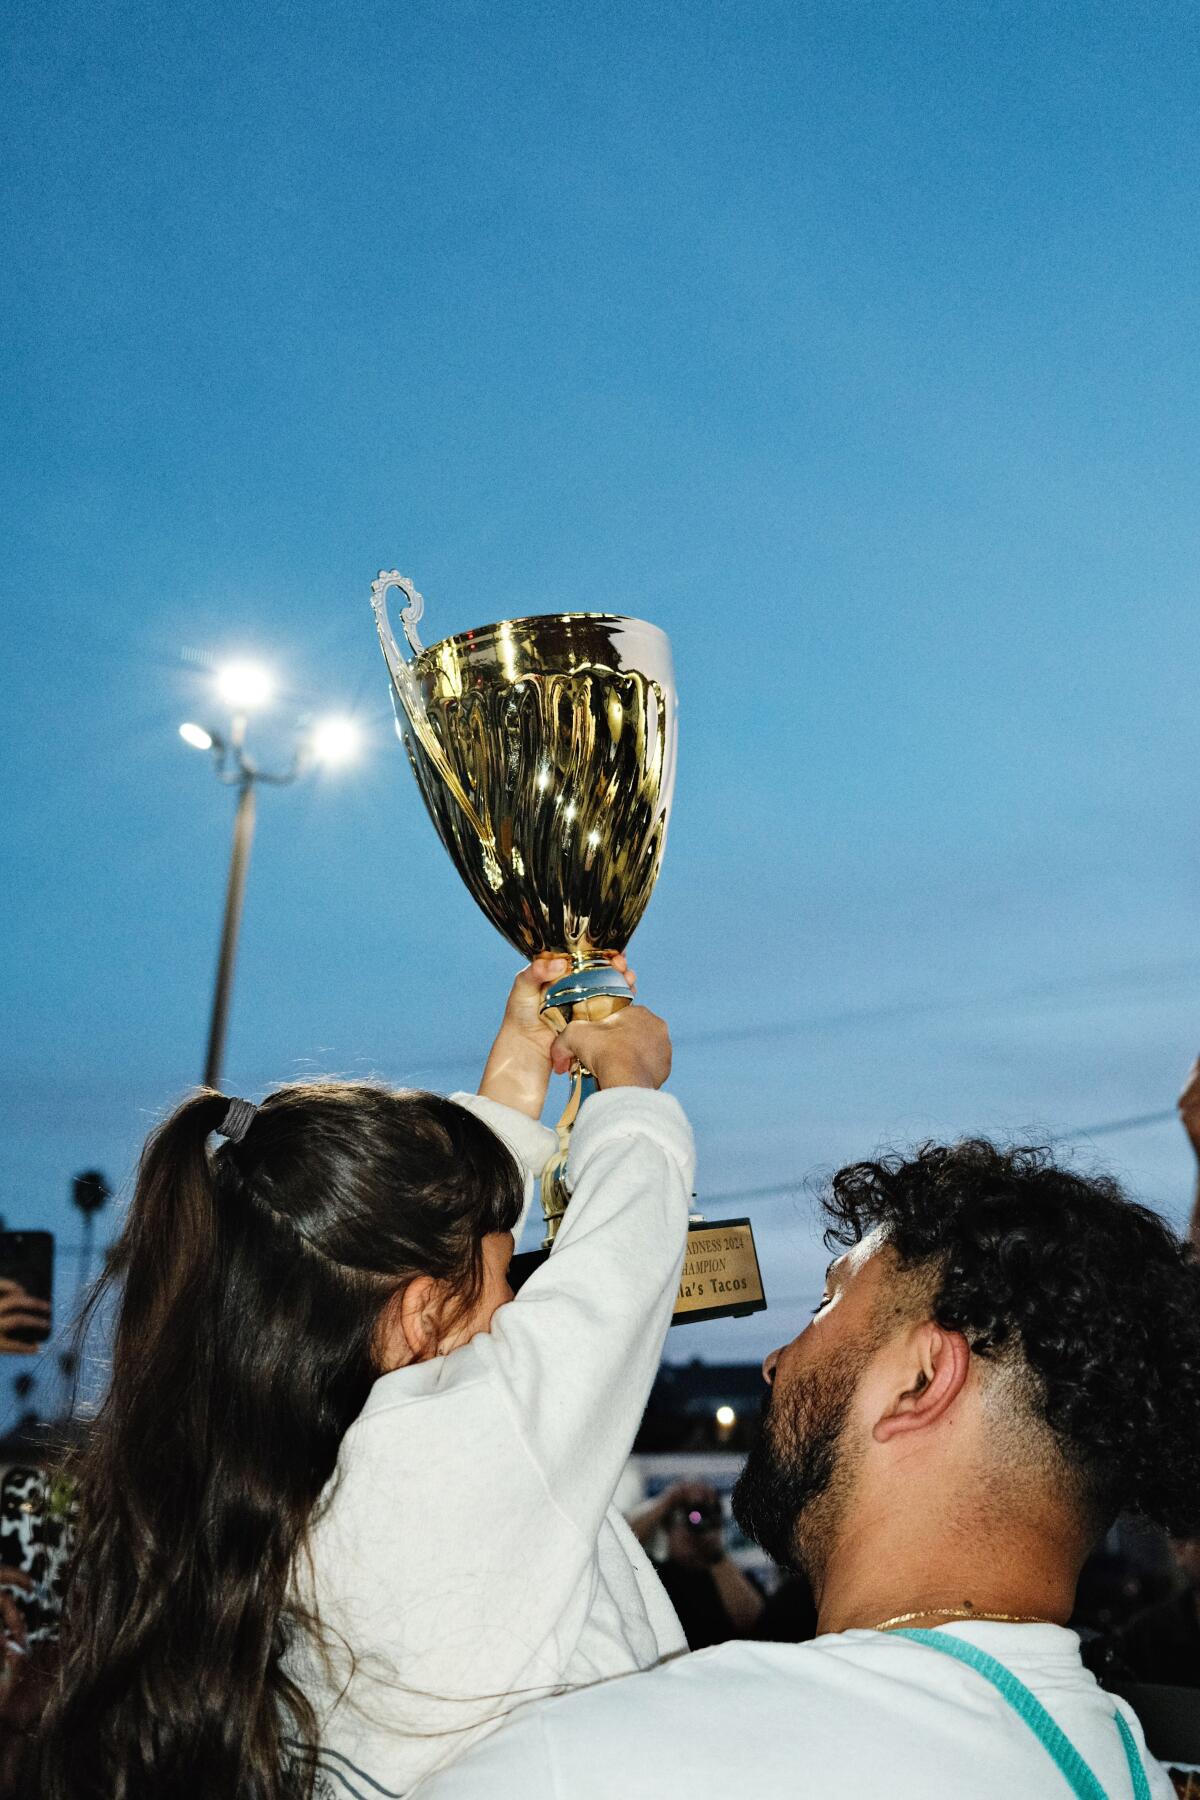 A little girl, seen from behind, holds a large gold trophy overhead in a parking lot at sundown.